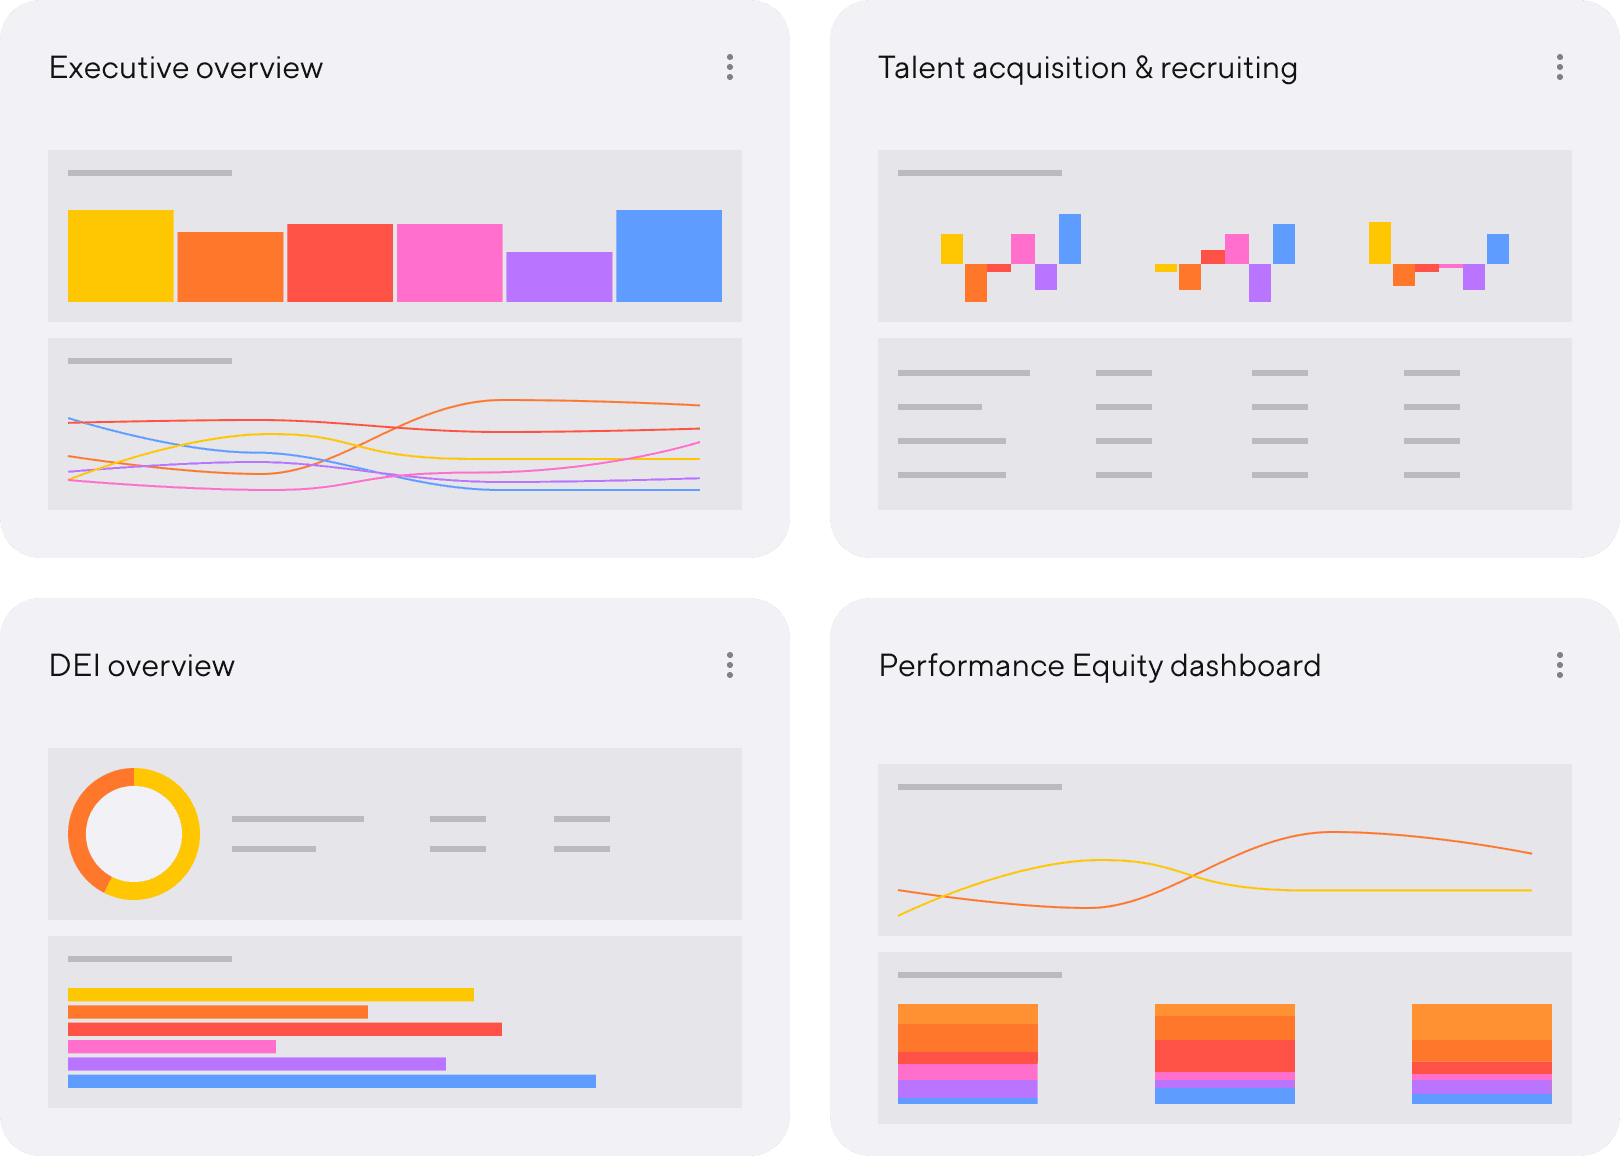 Samples of Dandi dashboards titled Executive overview, Talent acquisition & recruiting, DEI overview, and Performance Equity dashboard and displaying stylized illustrations of analytics including bar graph, line graph, and donut chart.